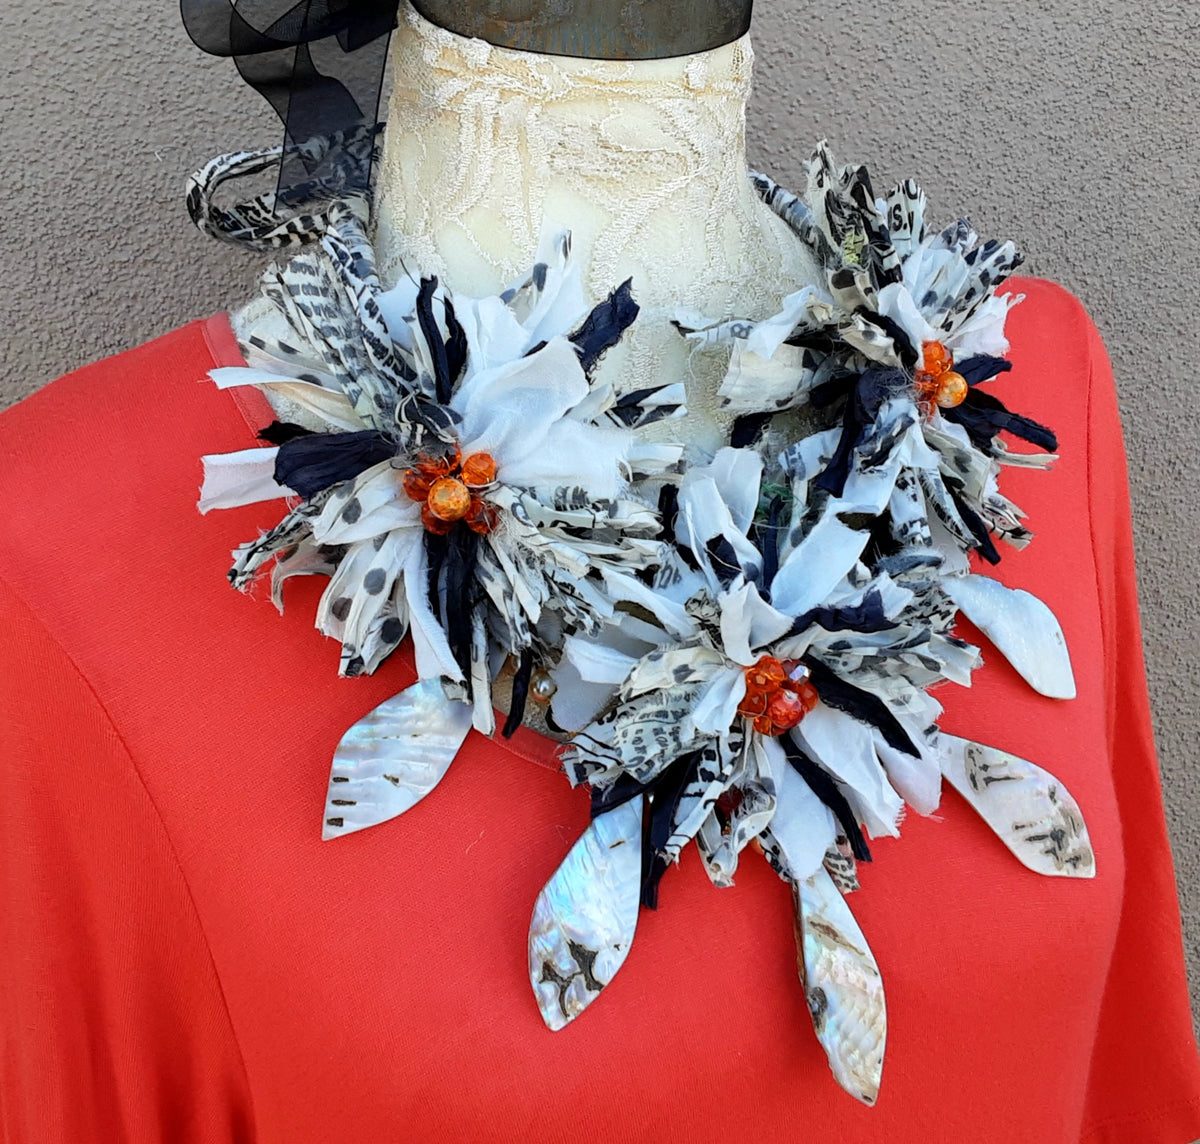 Boho Shell Black & White Sari Silk Flower Statement Necklace - Unique Gypsy Style Gift for Her